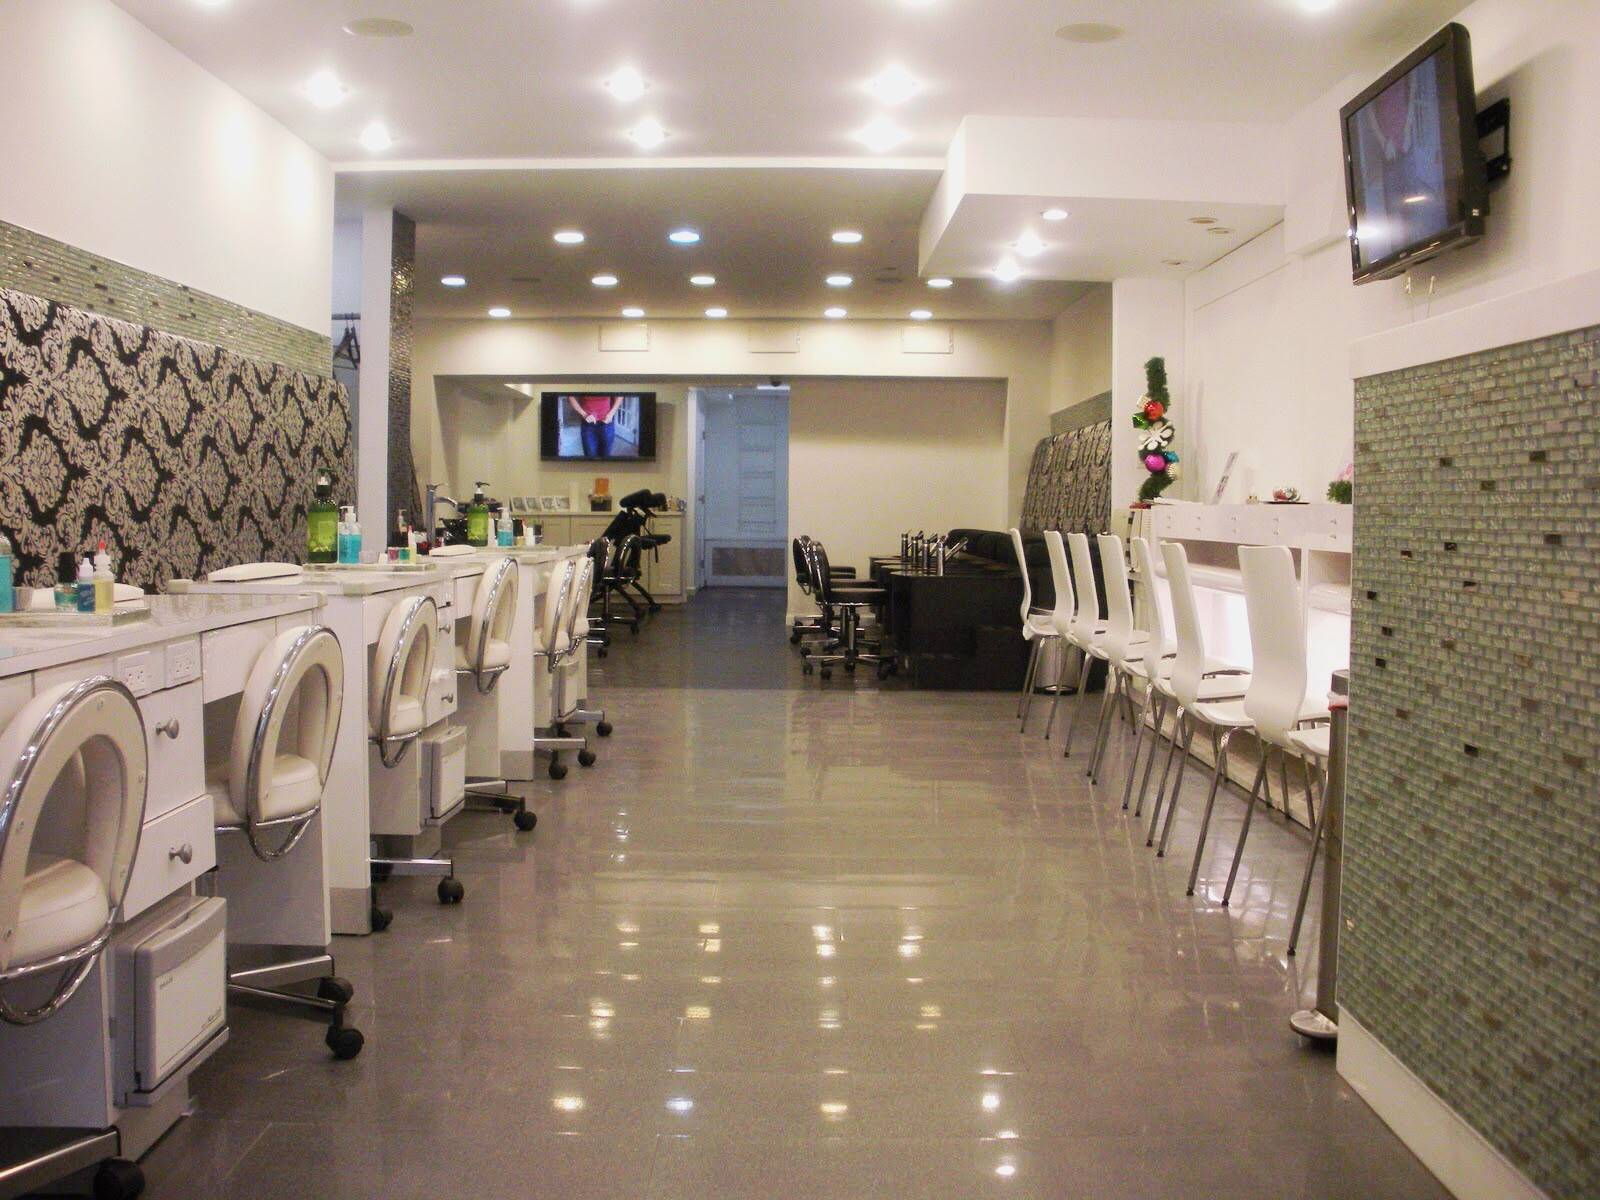 Business for sale! Busy nail salon in Midtown East near Grand Central